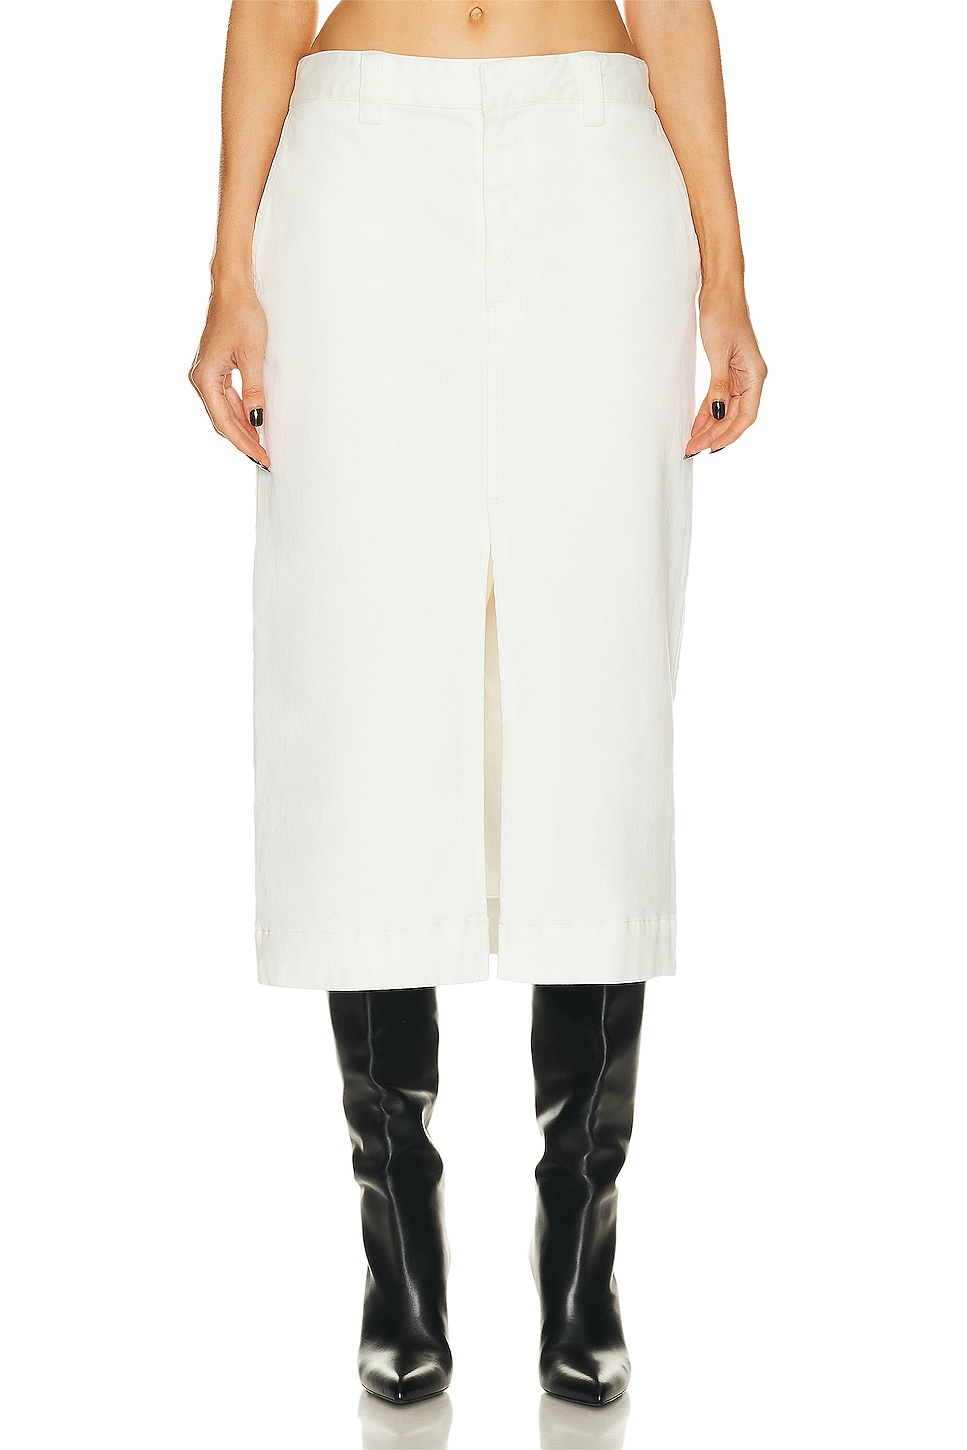 Image 1 of Enza Costa Soft Touch Slit Skirt in Undyed